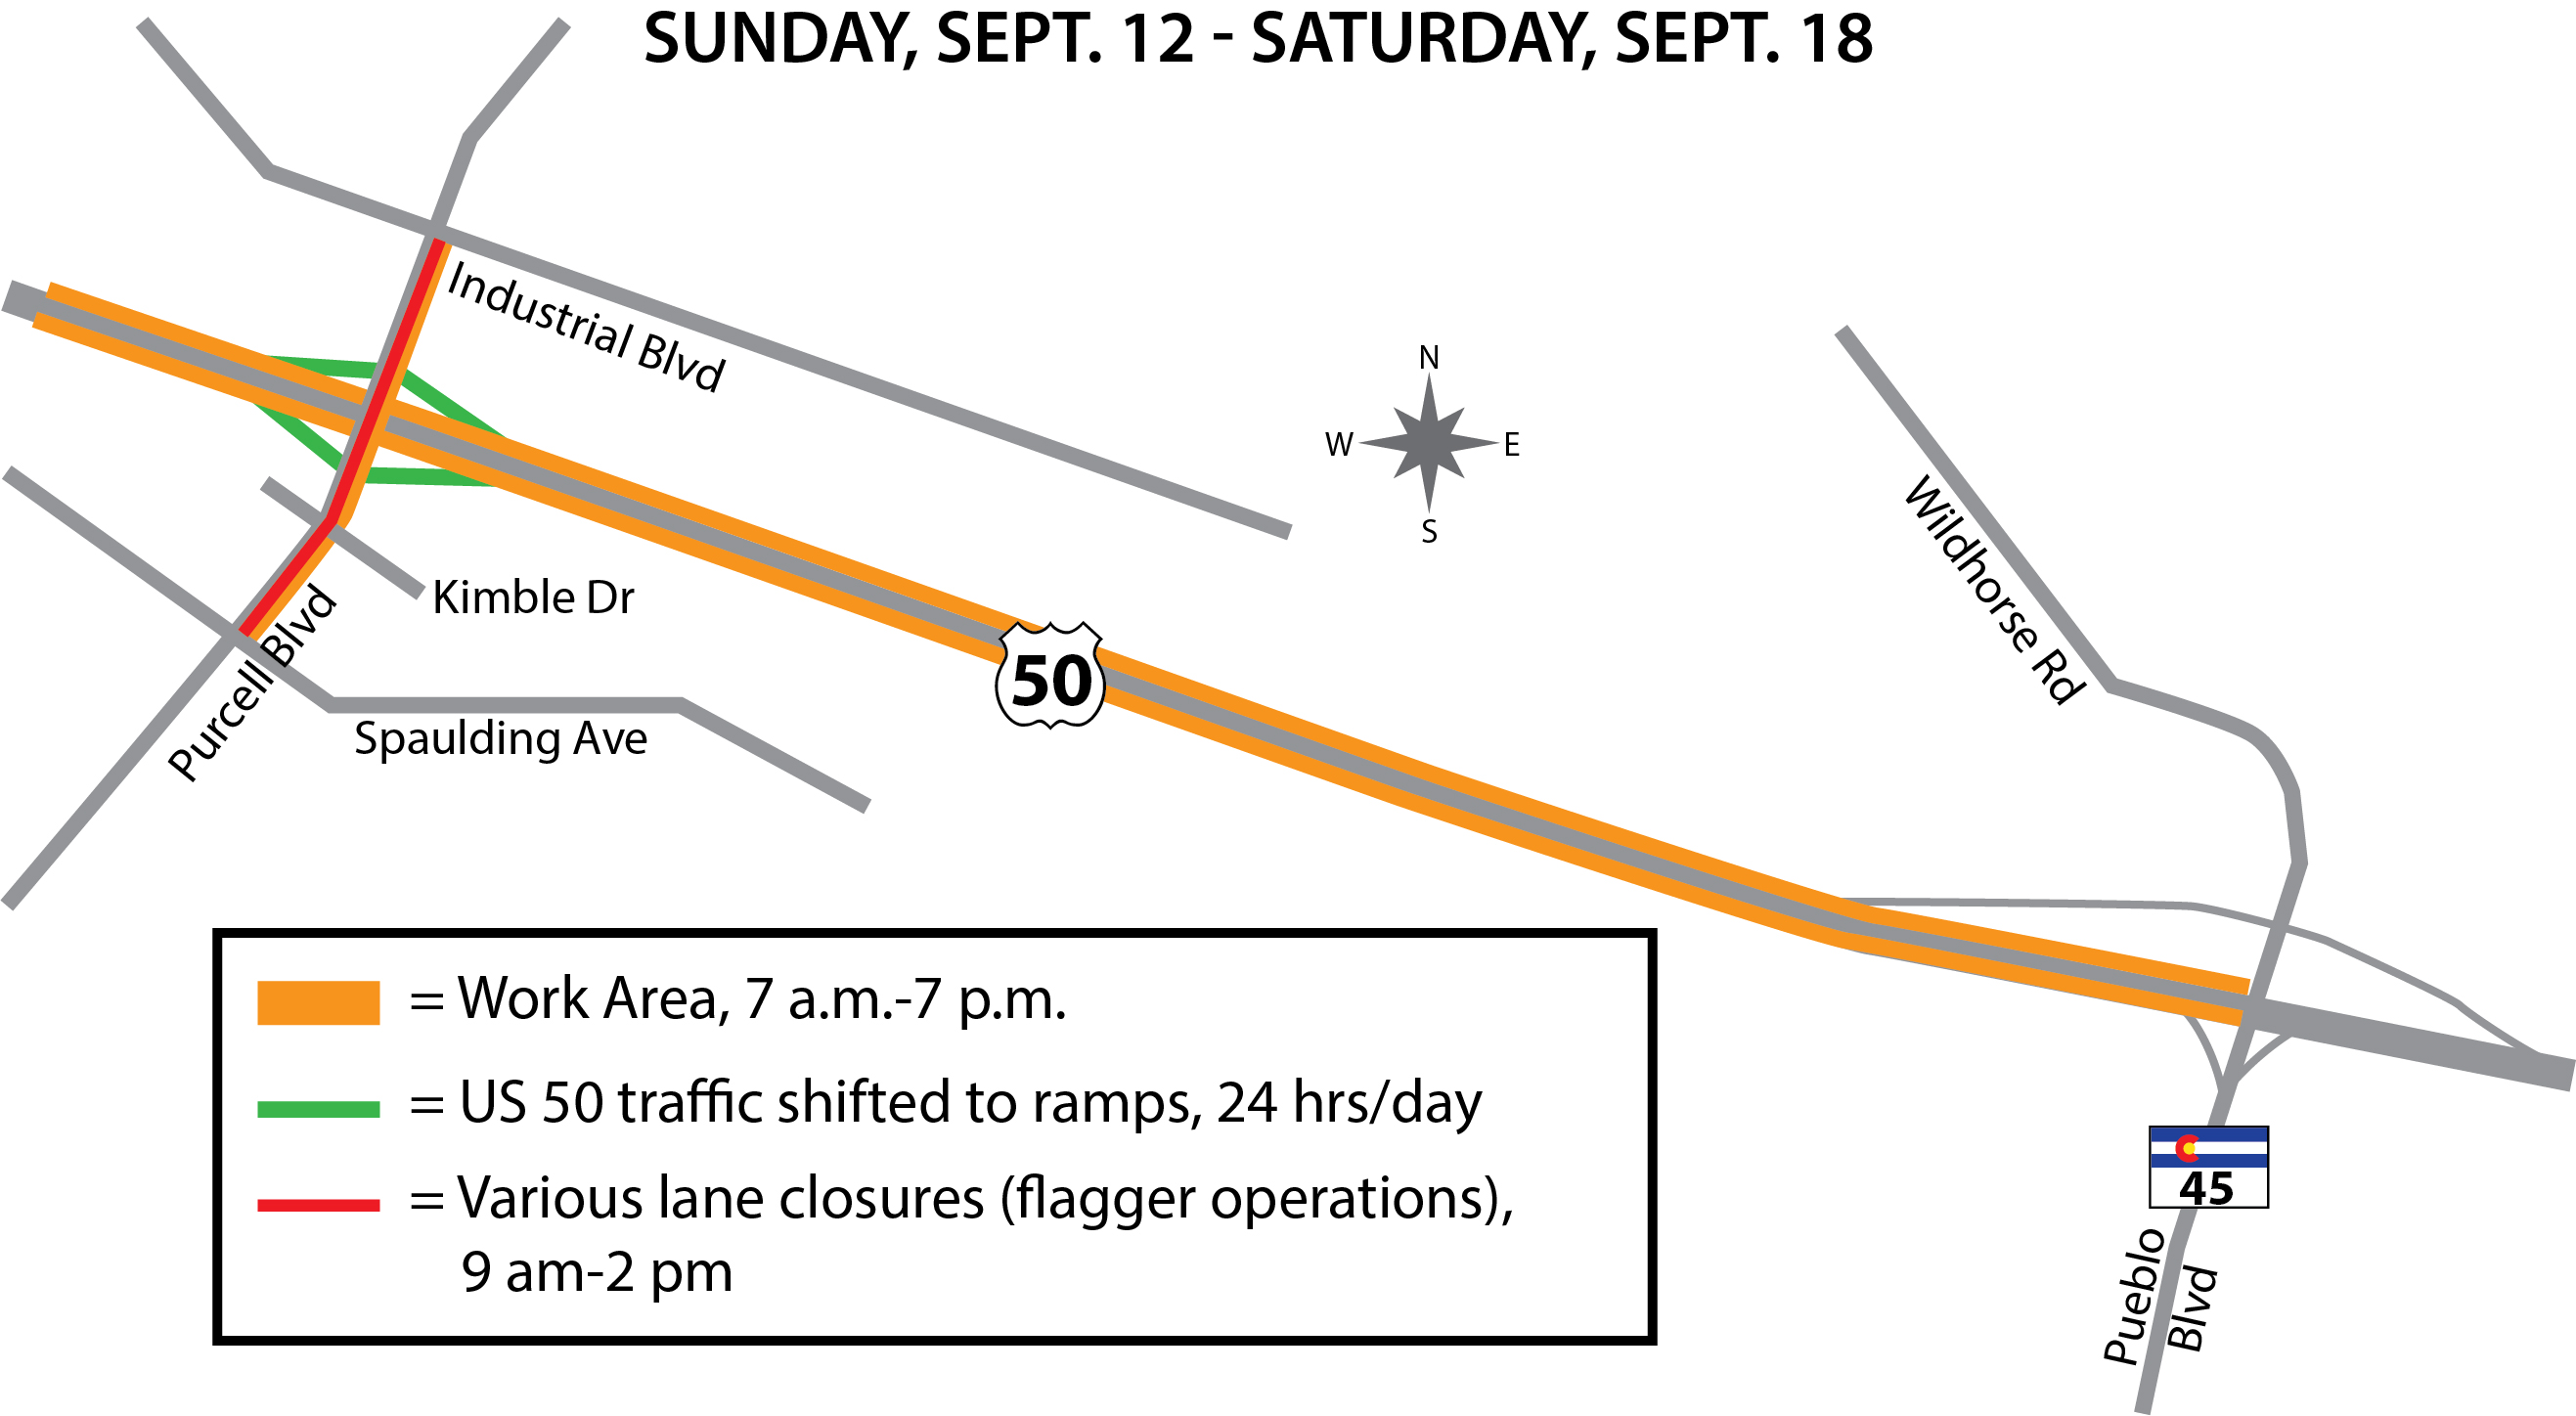 US 50 Purcell map Sept 12.jpg detail image